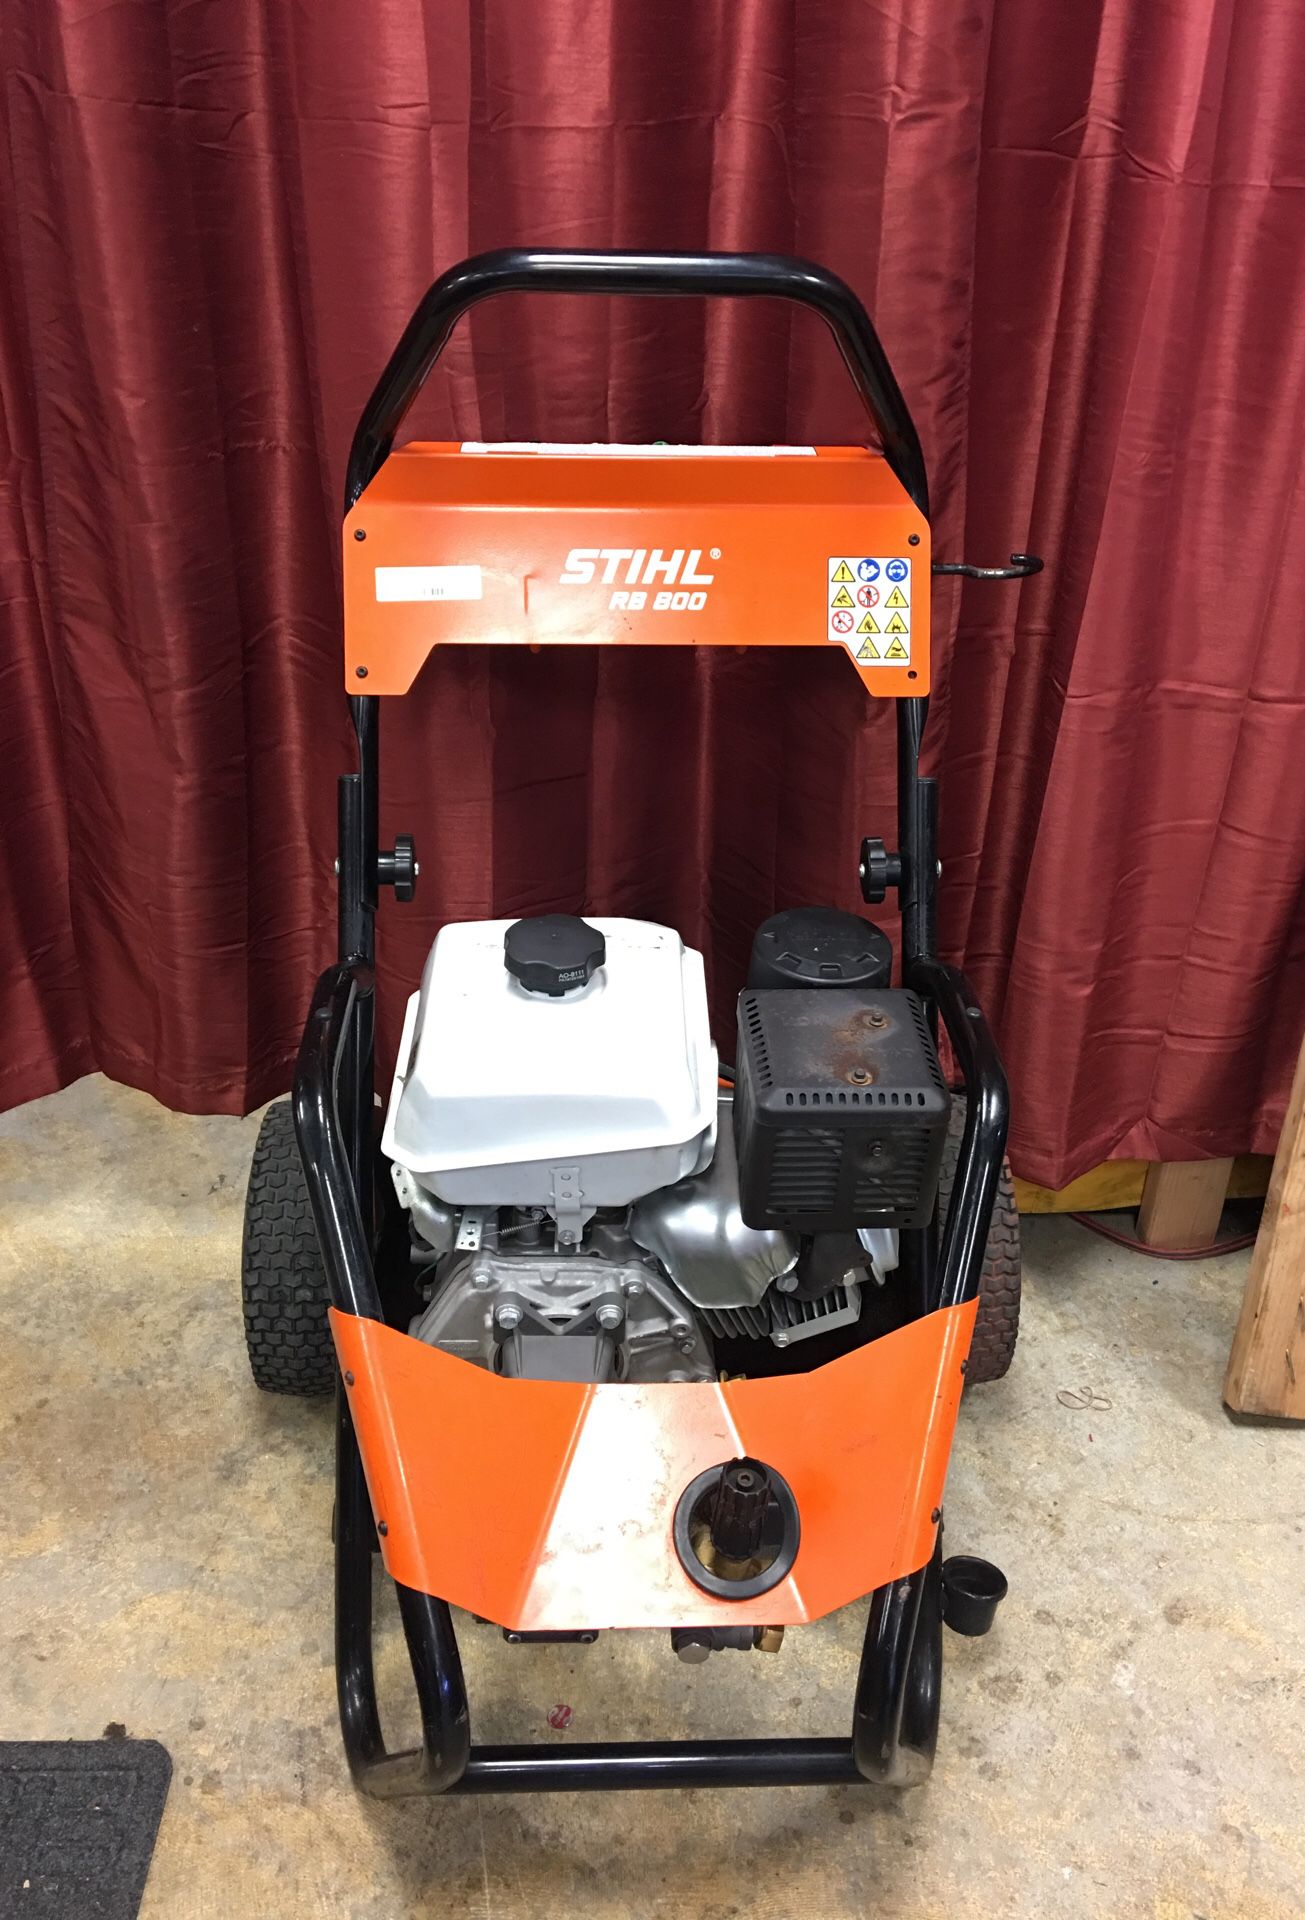 Stihl BR800 Pressure washer with wand and hose